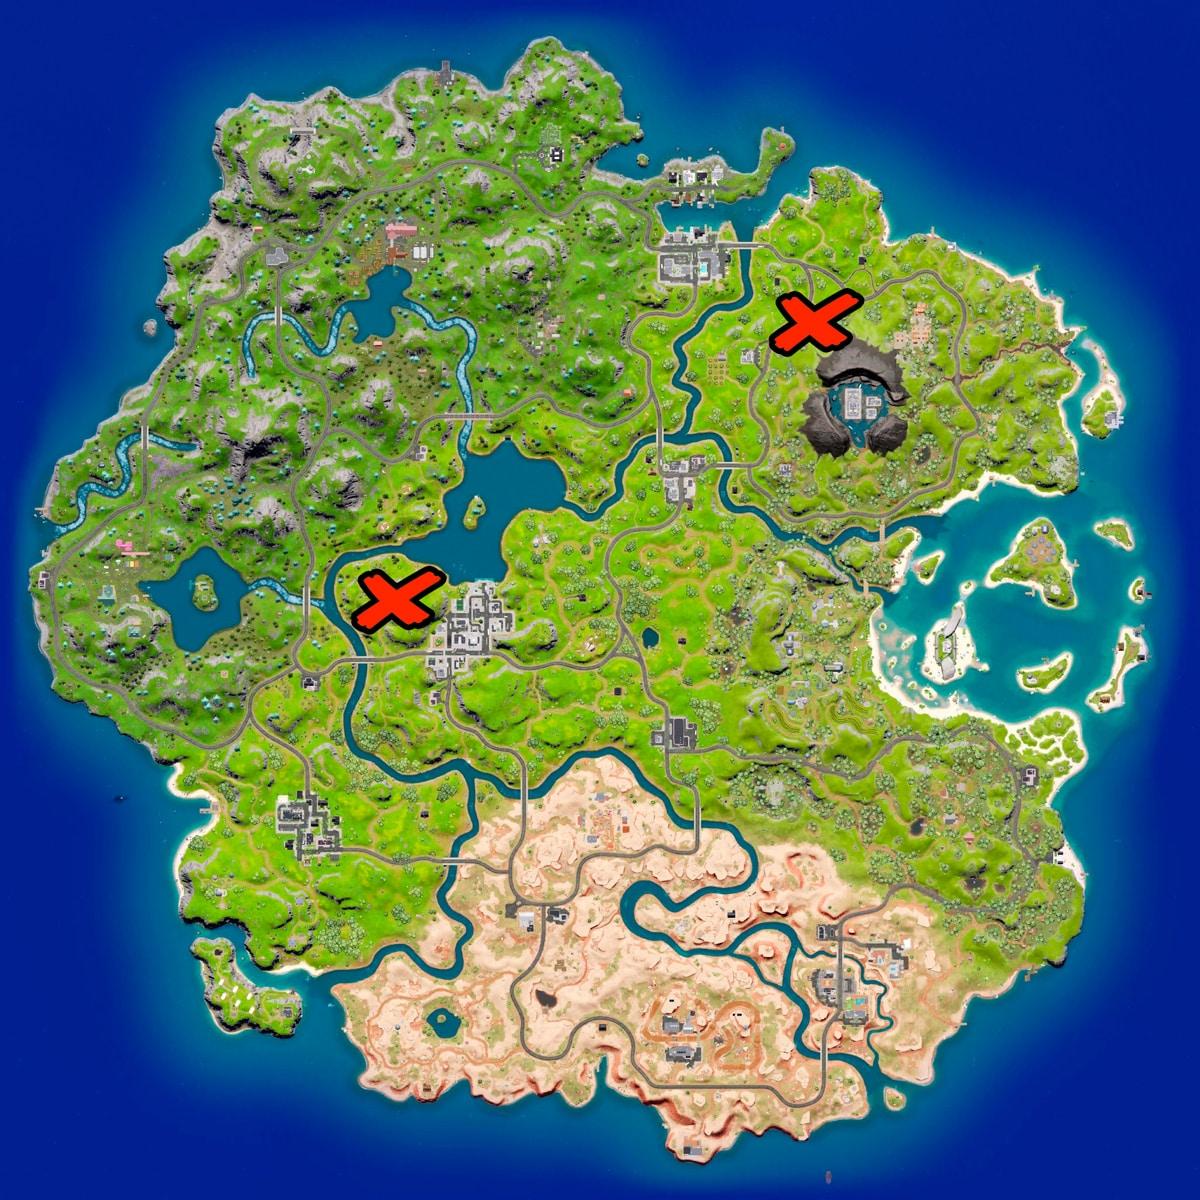 Klomberry spawn locations marked on the Fortnite Chapter 3 map